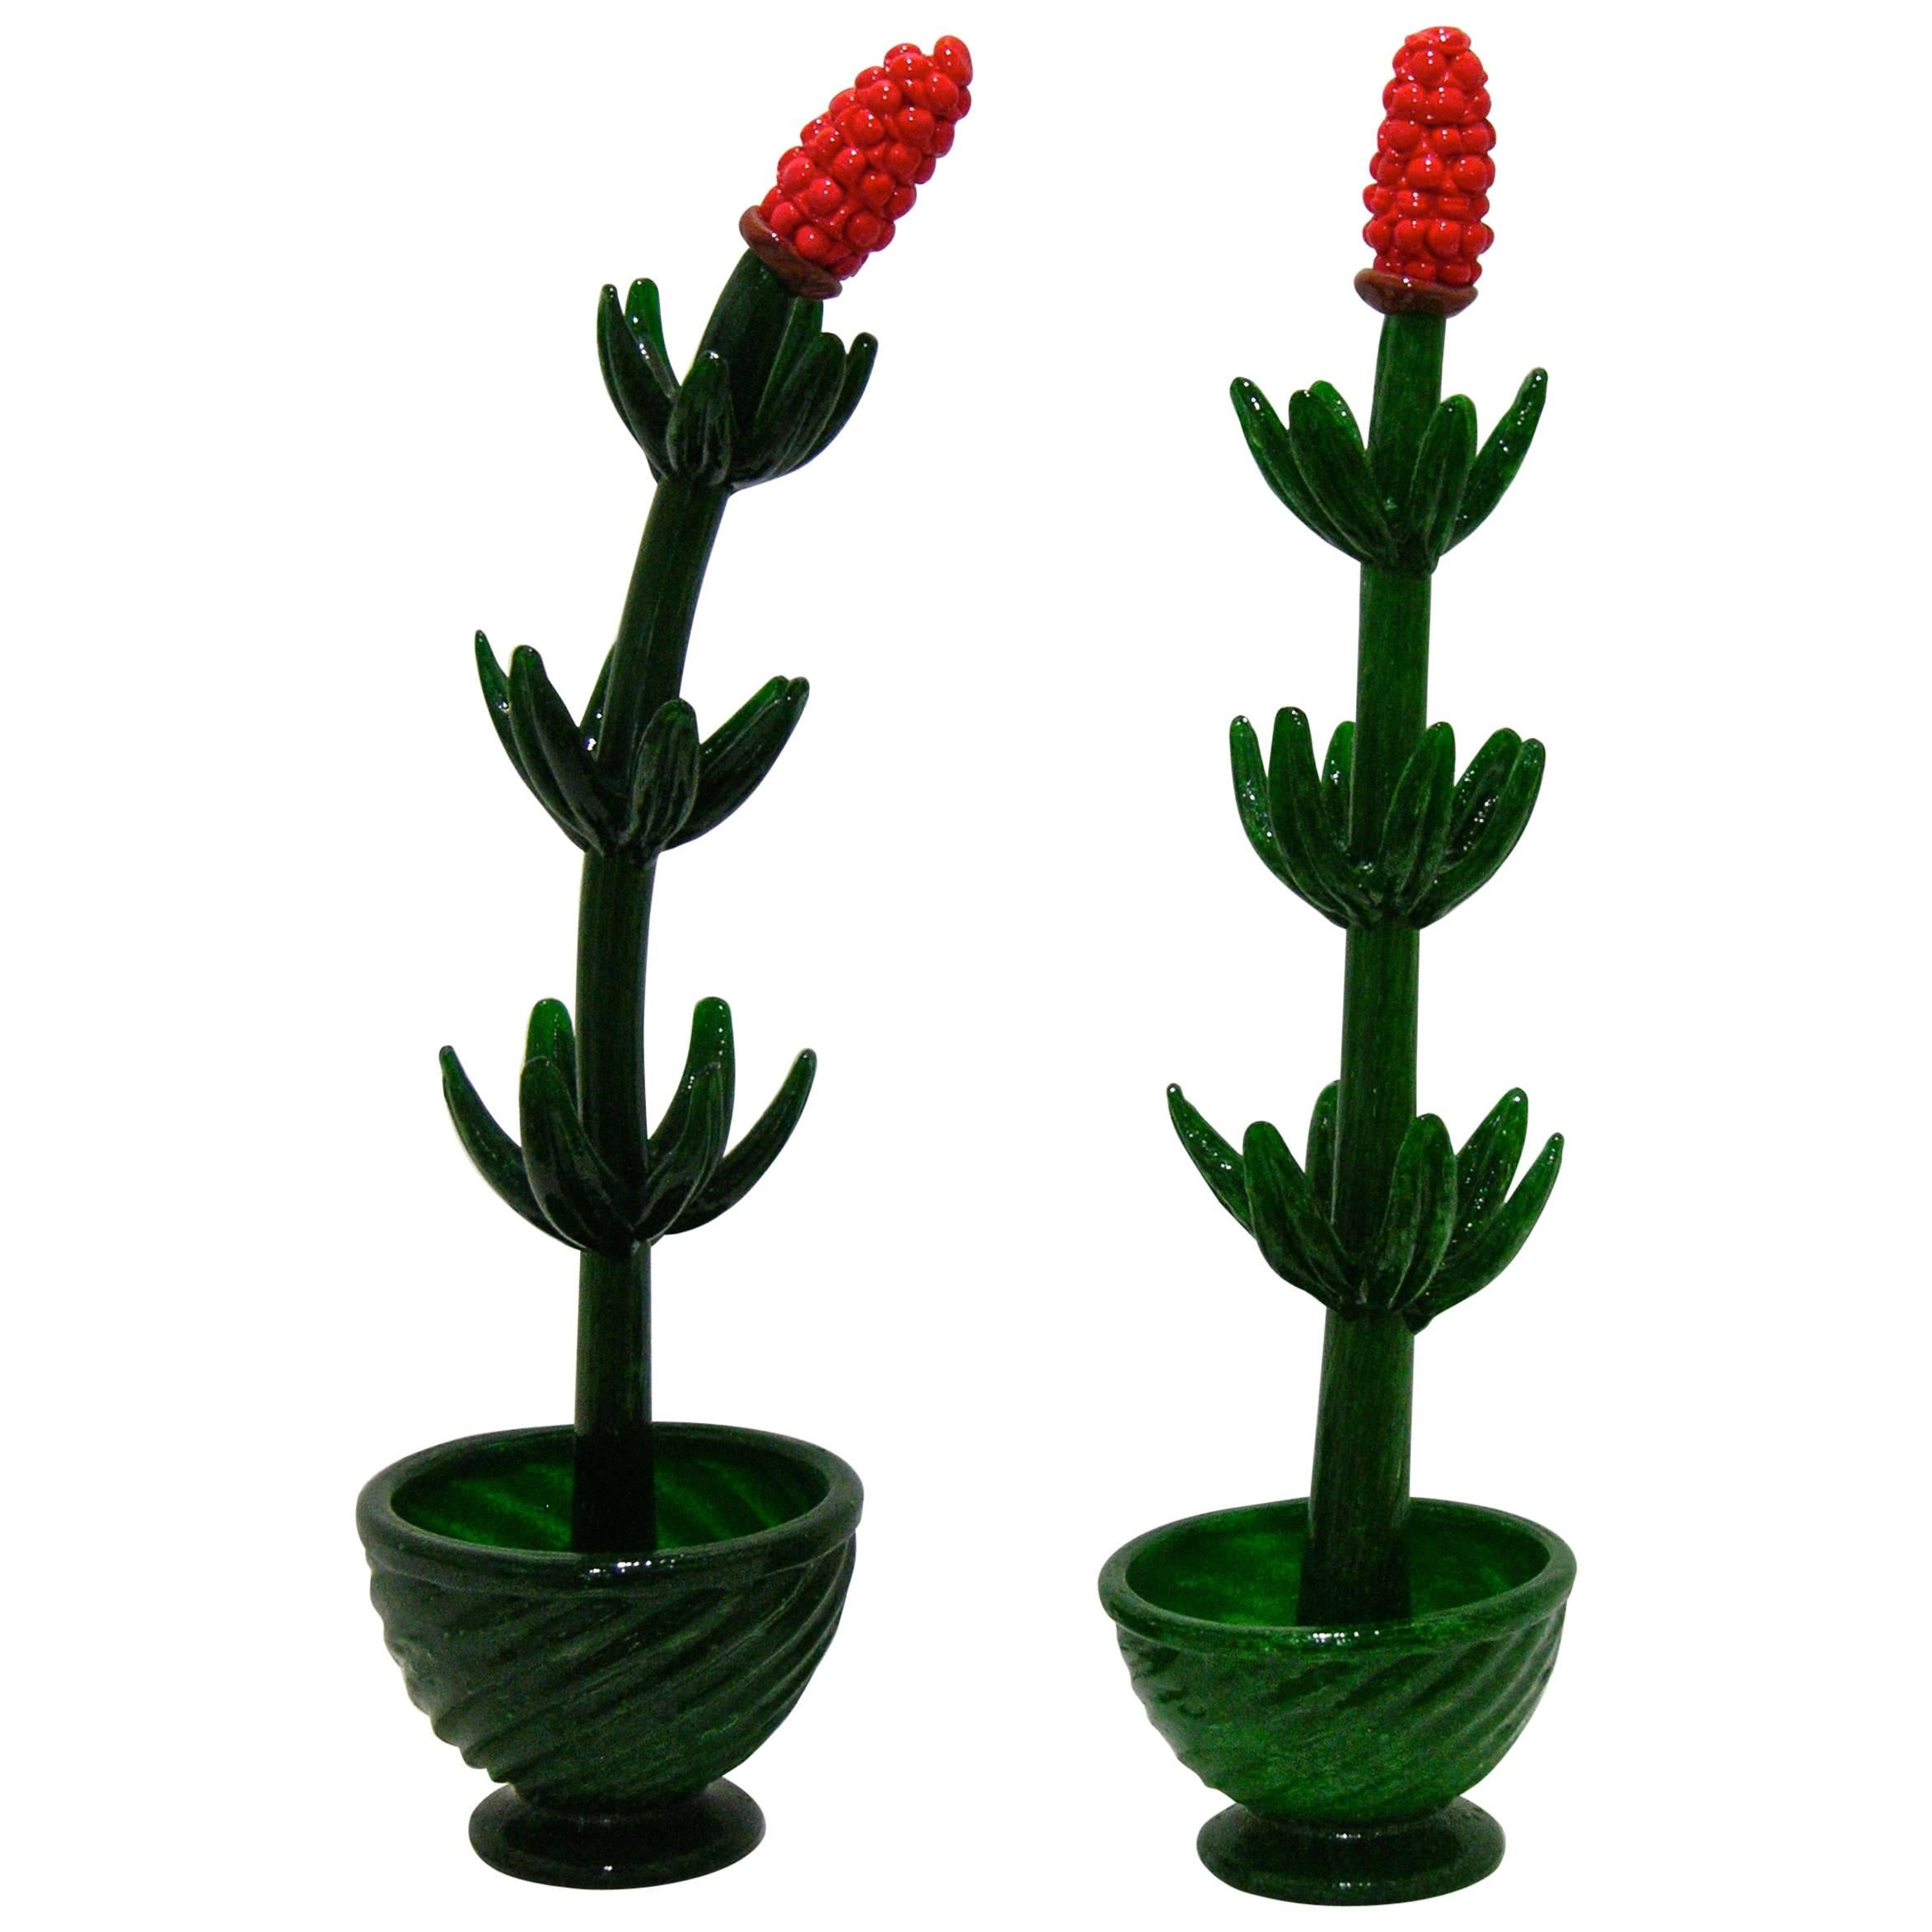 1980s Italian Pair of Organic Green Murano Glass Potted Plants with Red Flower